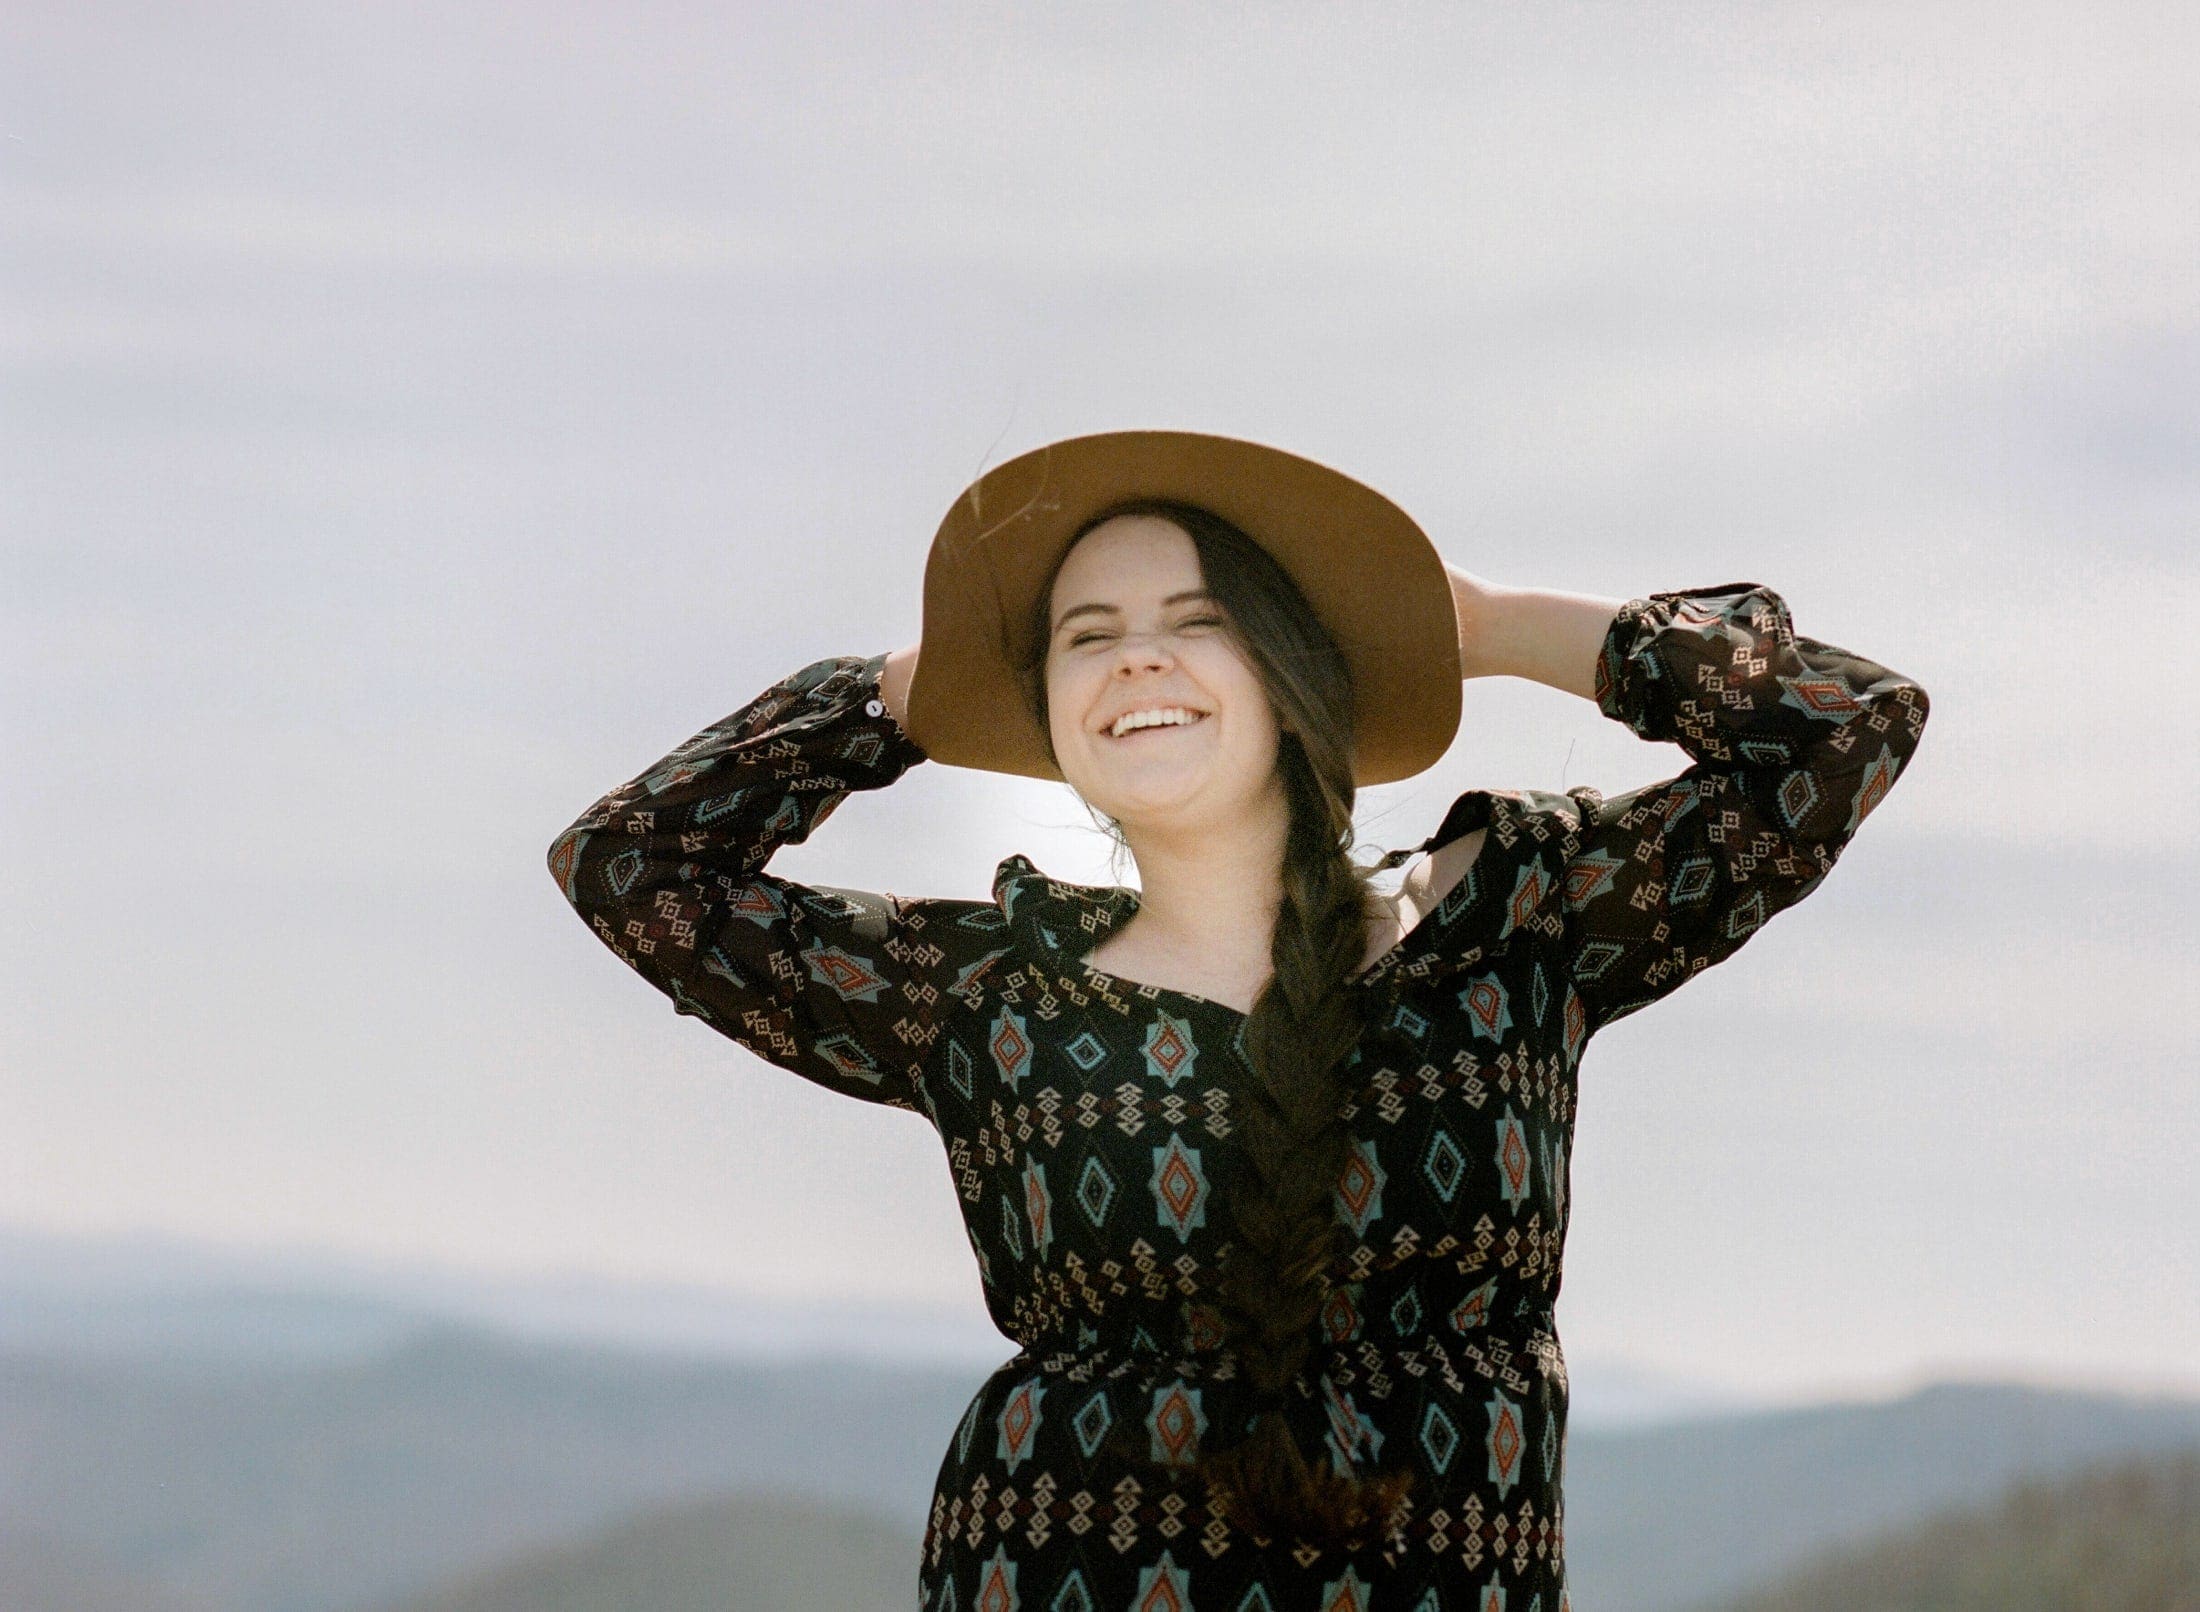 Film-Portra 400, Asheville Film Photography, Blue Ridge Parkway, Mountains in background, girl in hat laughing